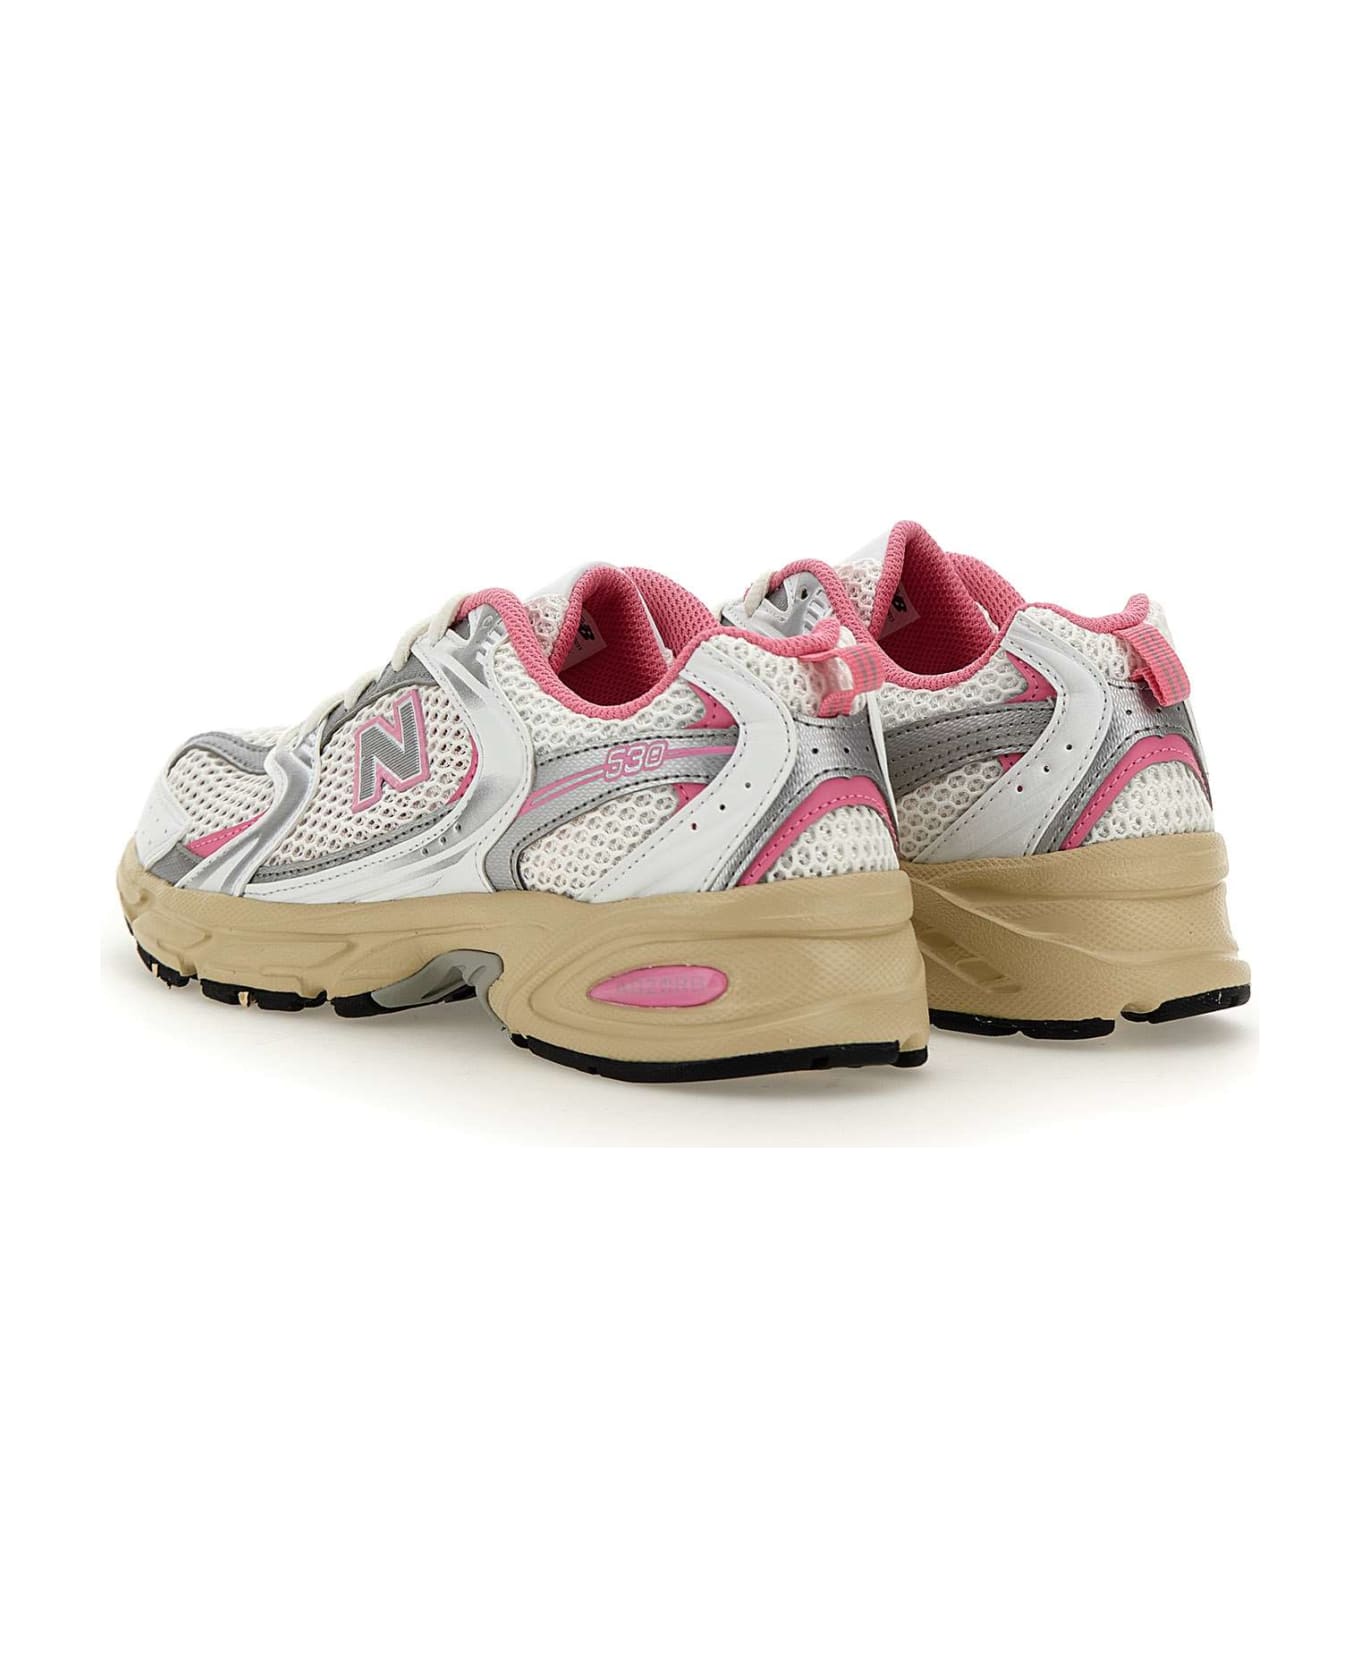 New Balance "mr530" Sneakers - WHITE-PINK